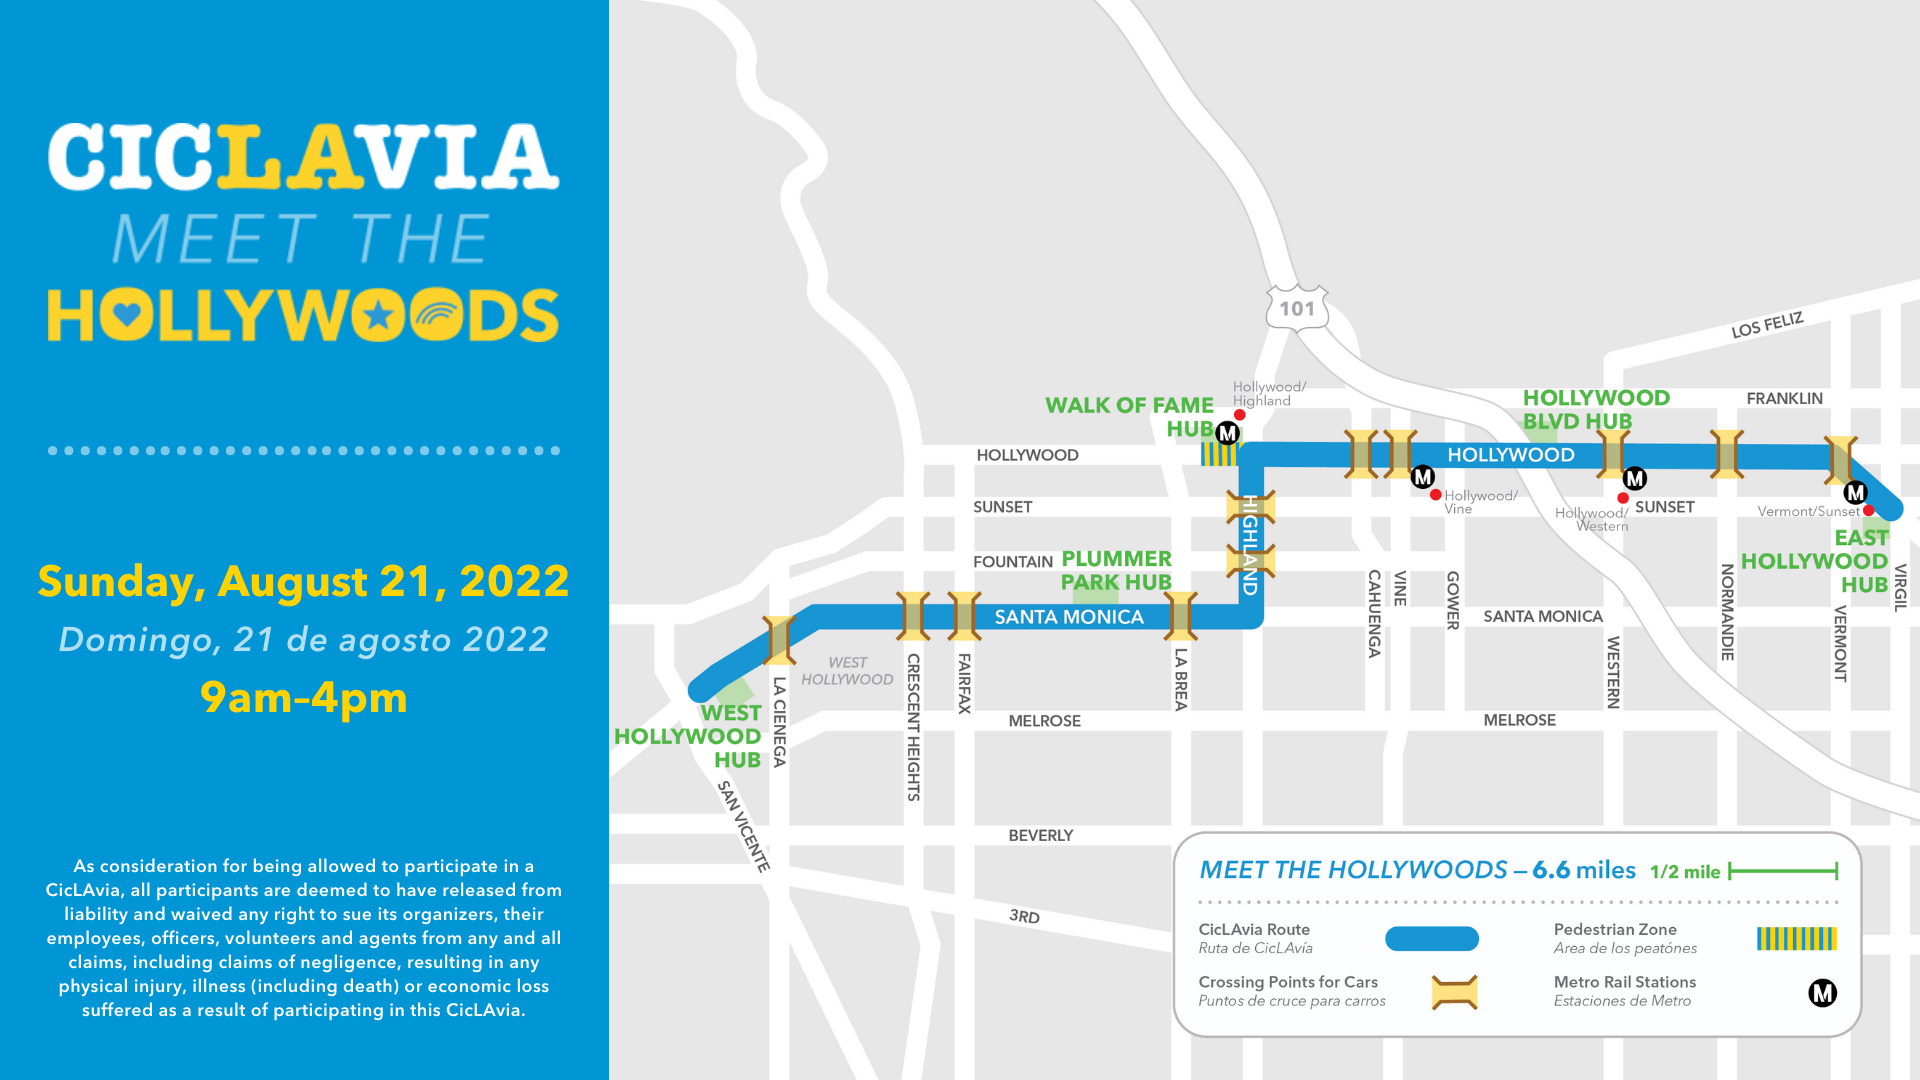 CicLAvia: Meet the Hollywoods